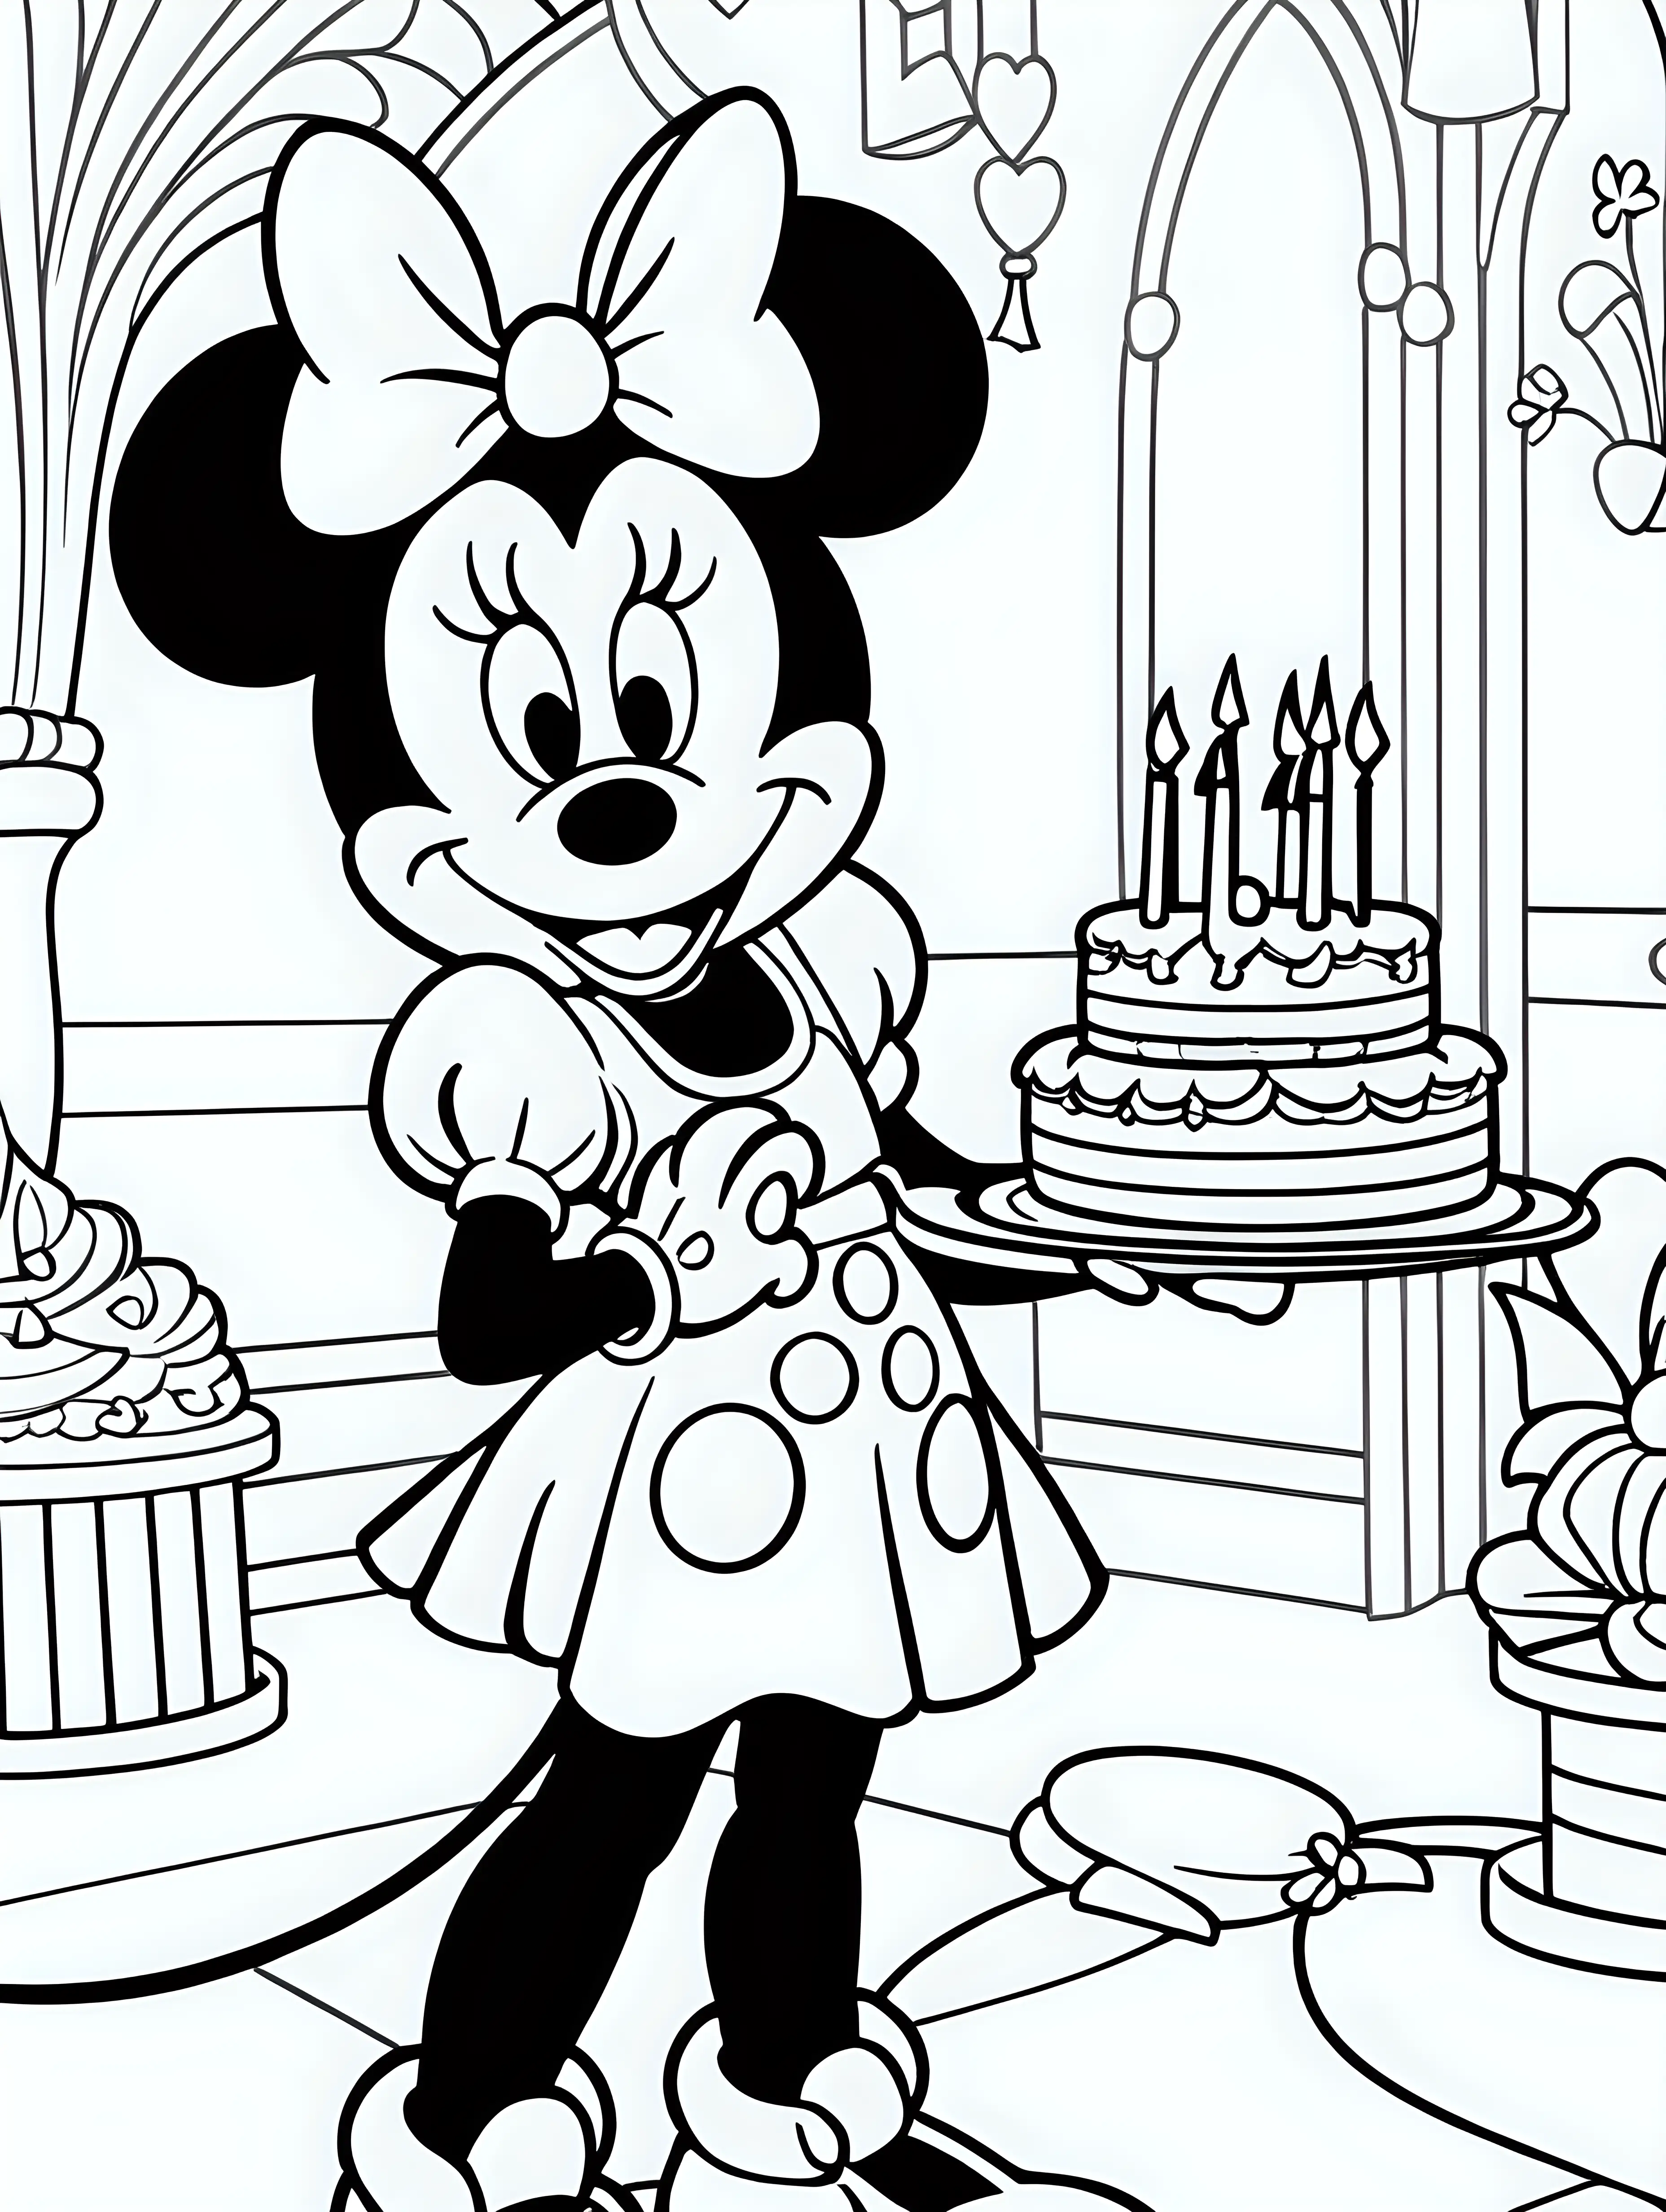 black and white, coloring page, clear defined dark lines and line border, no shadows, no greying, without the use of shadows or any form of graying. Emphasize clean lines, distinct shapes, and solid, non-gradient fills to maintain a simplistic and high-contrast appearance suitable for coloring, white areas, white background, Minnie Mouse celebrating a Minnie themed birthday party at Disneyland with her friends, ar--9:11